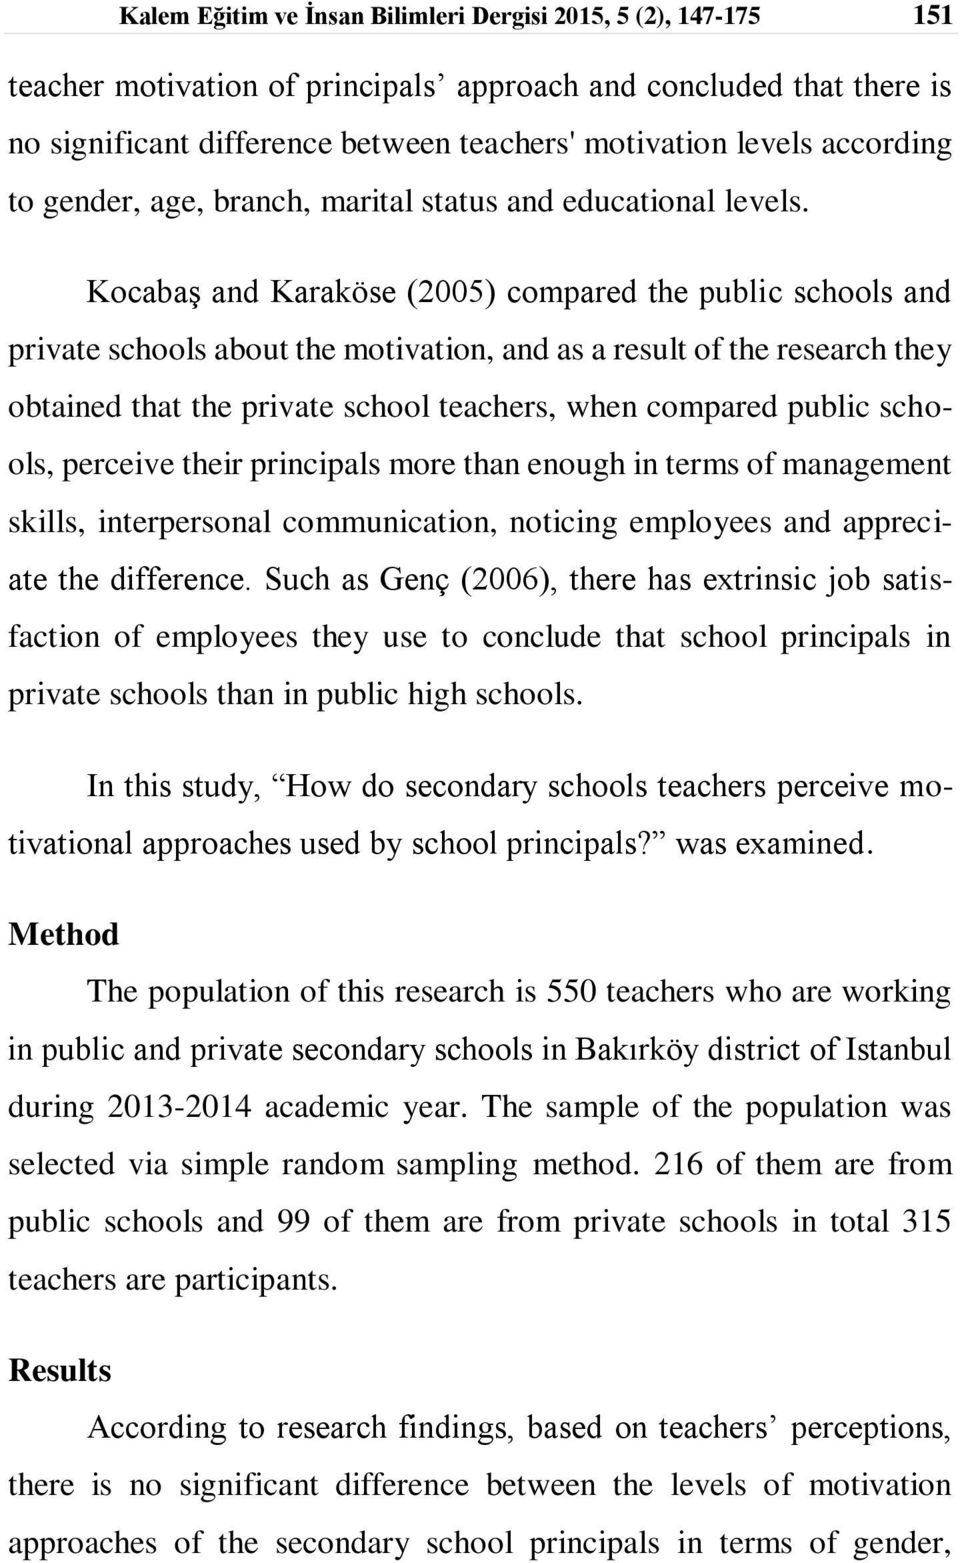 Kocabaş and Karaköse (2005) compared the public schools and private schools about the motivation, and as a result of the research they obtained that the private school teachers, when compared public